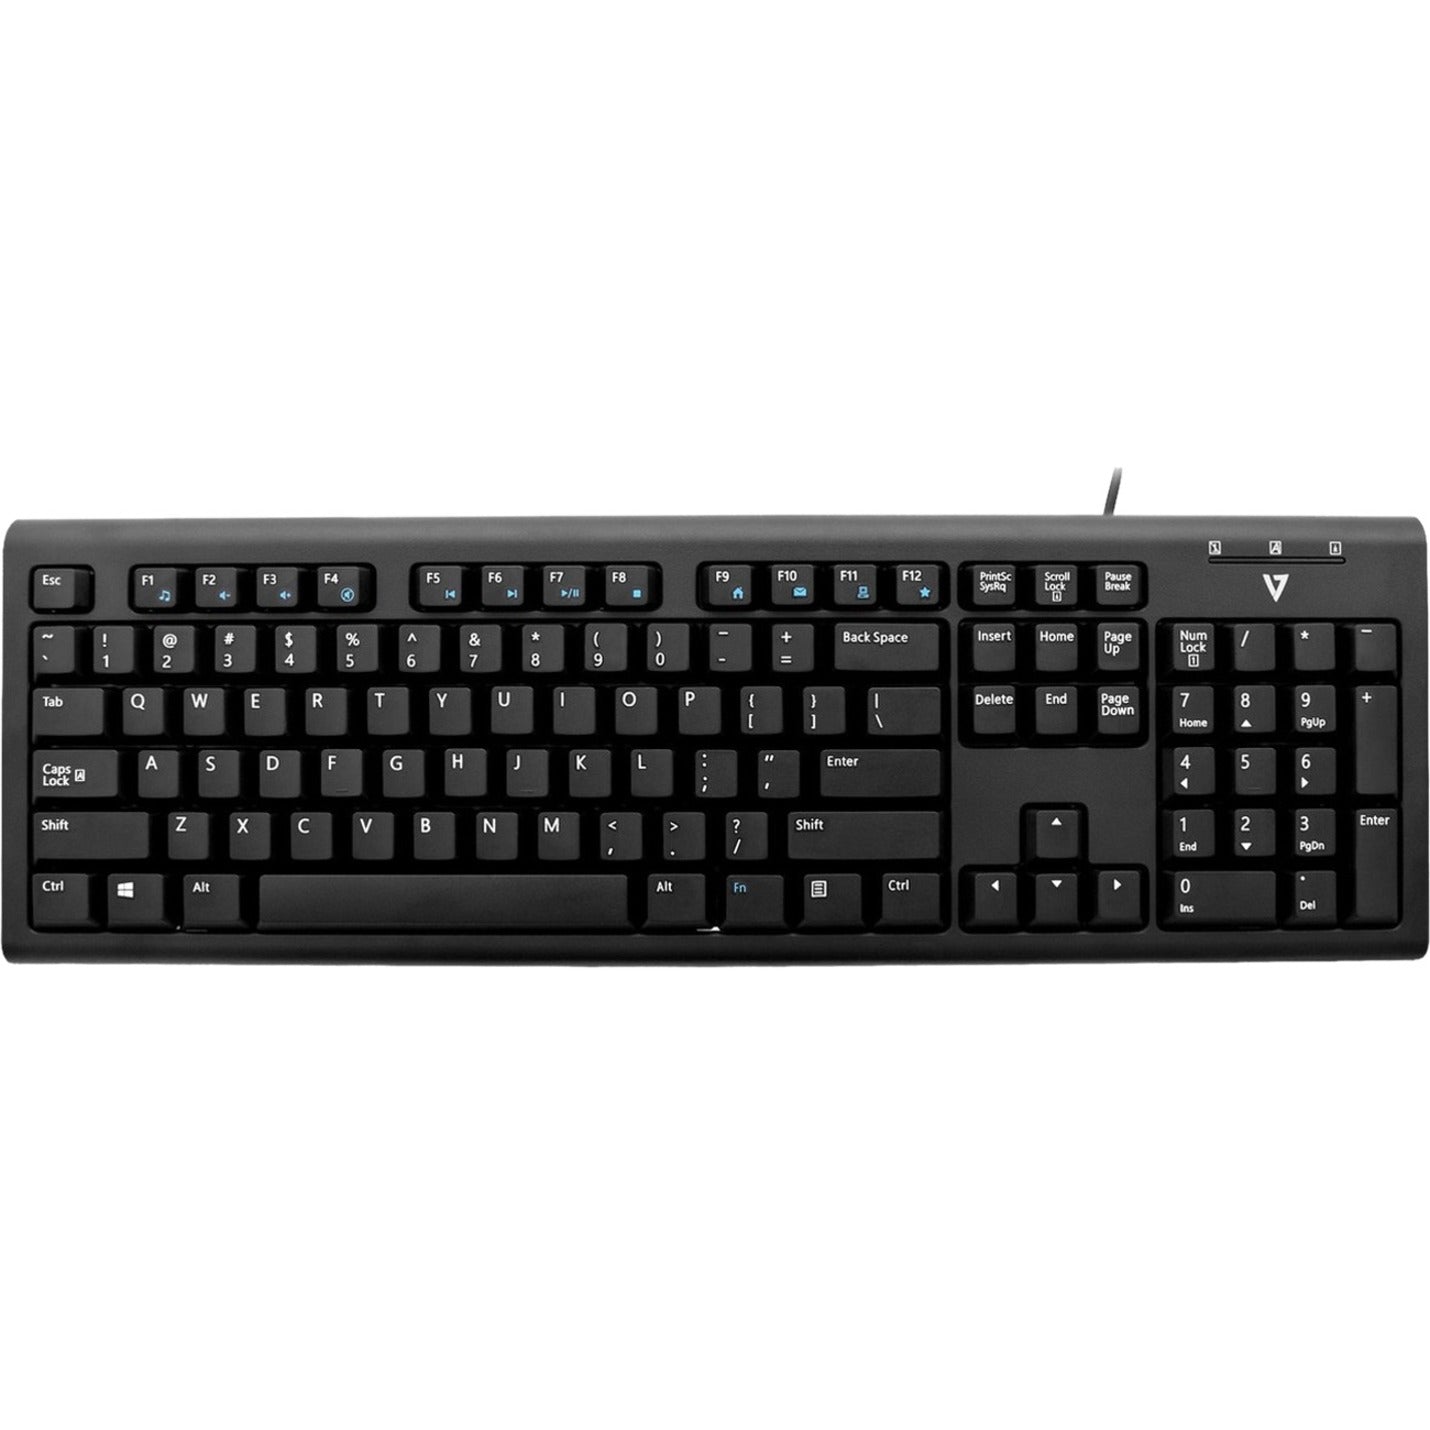 V7 KU200US USB/PS2 Wired Keyboard, Spill Resistant, Internet, Email, Play/Pause, Volume Control